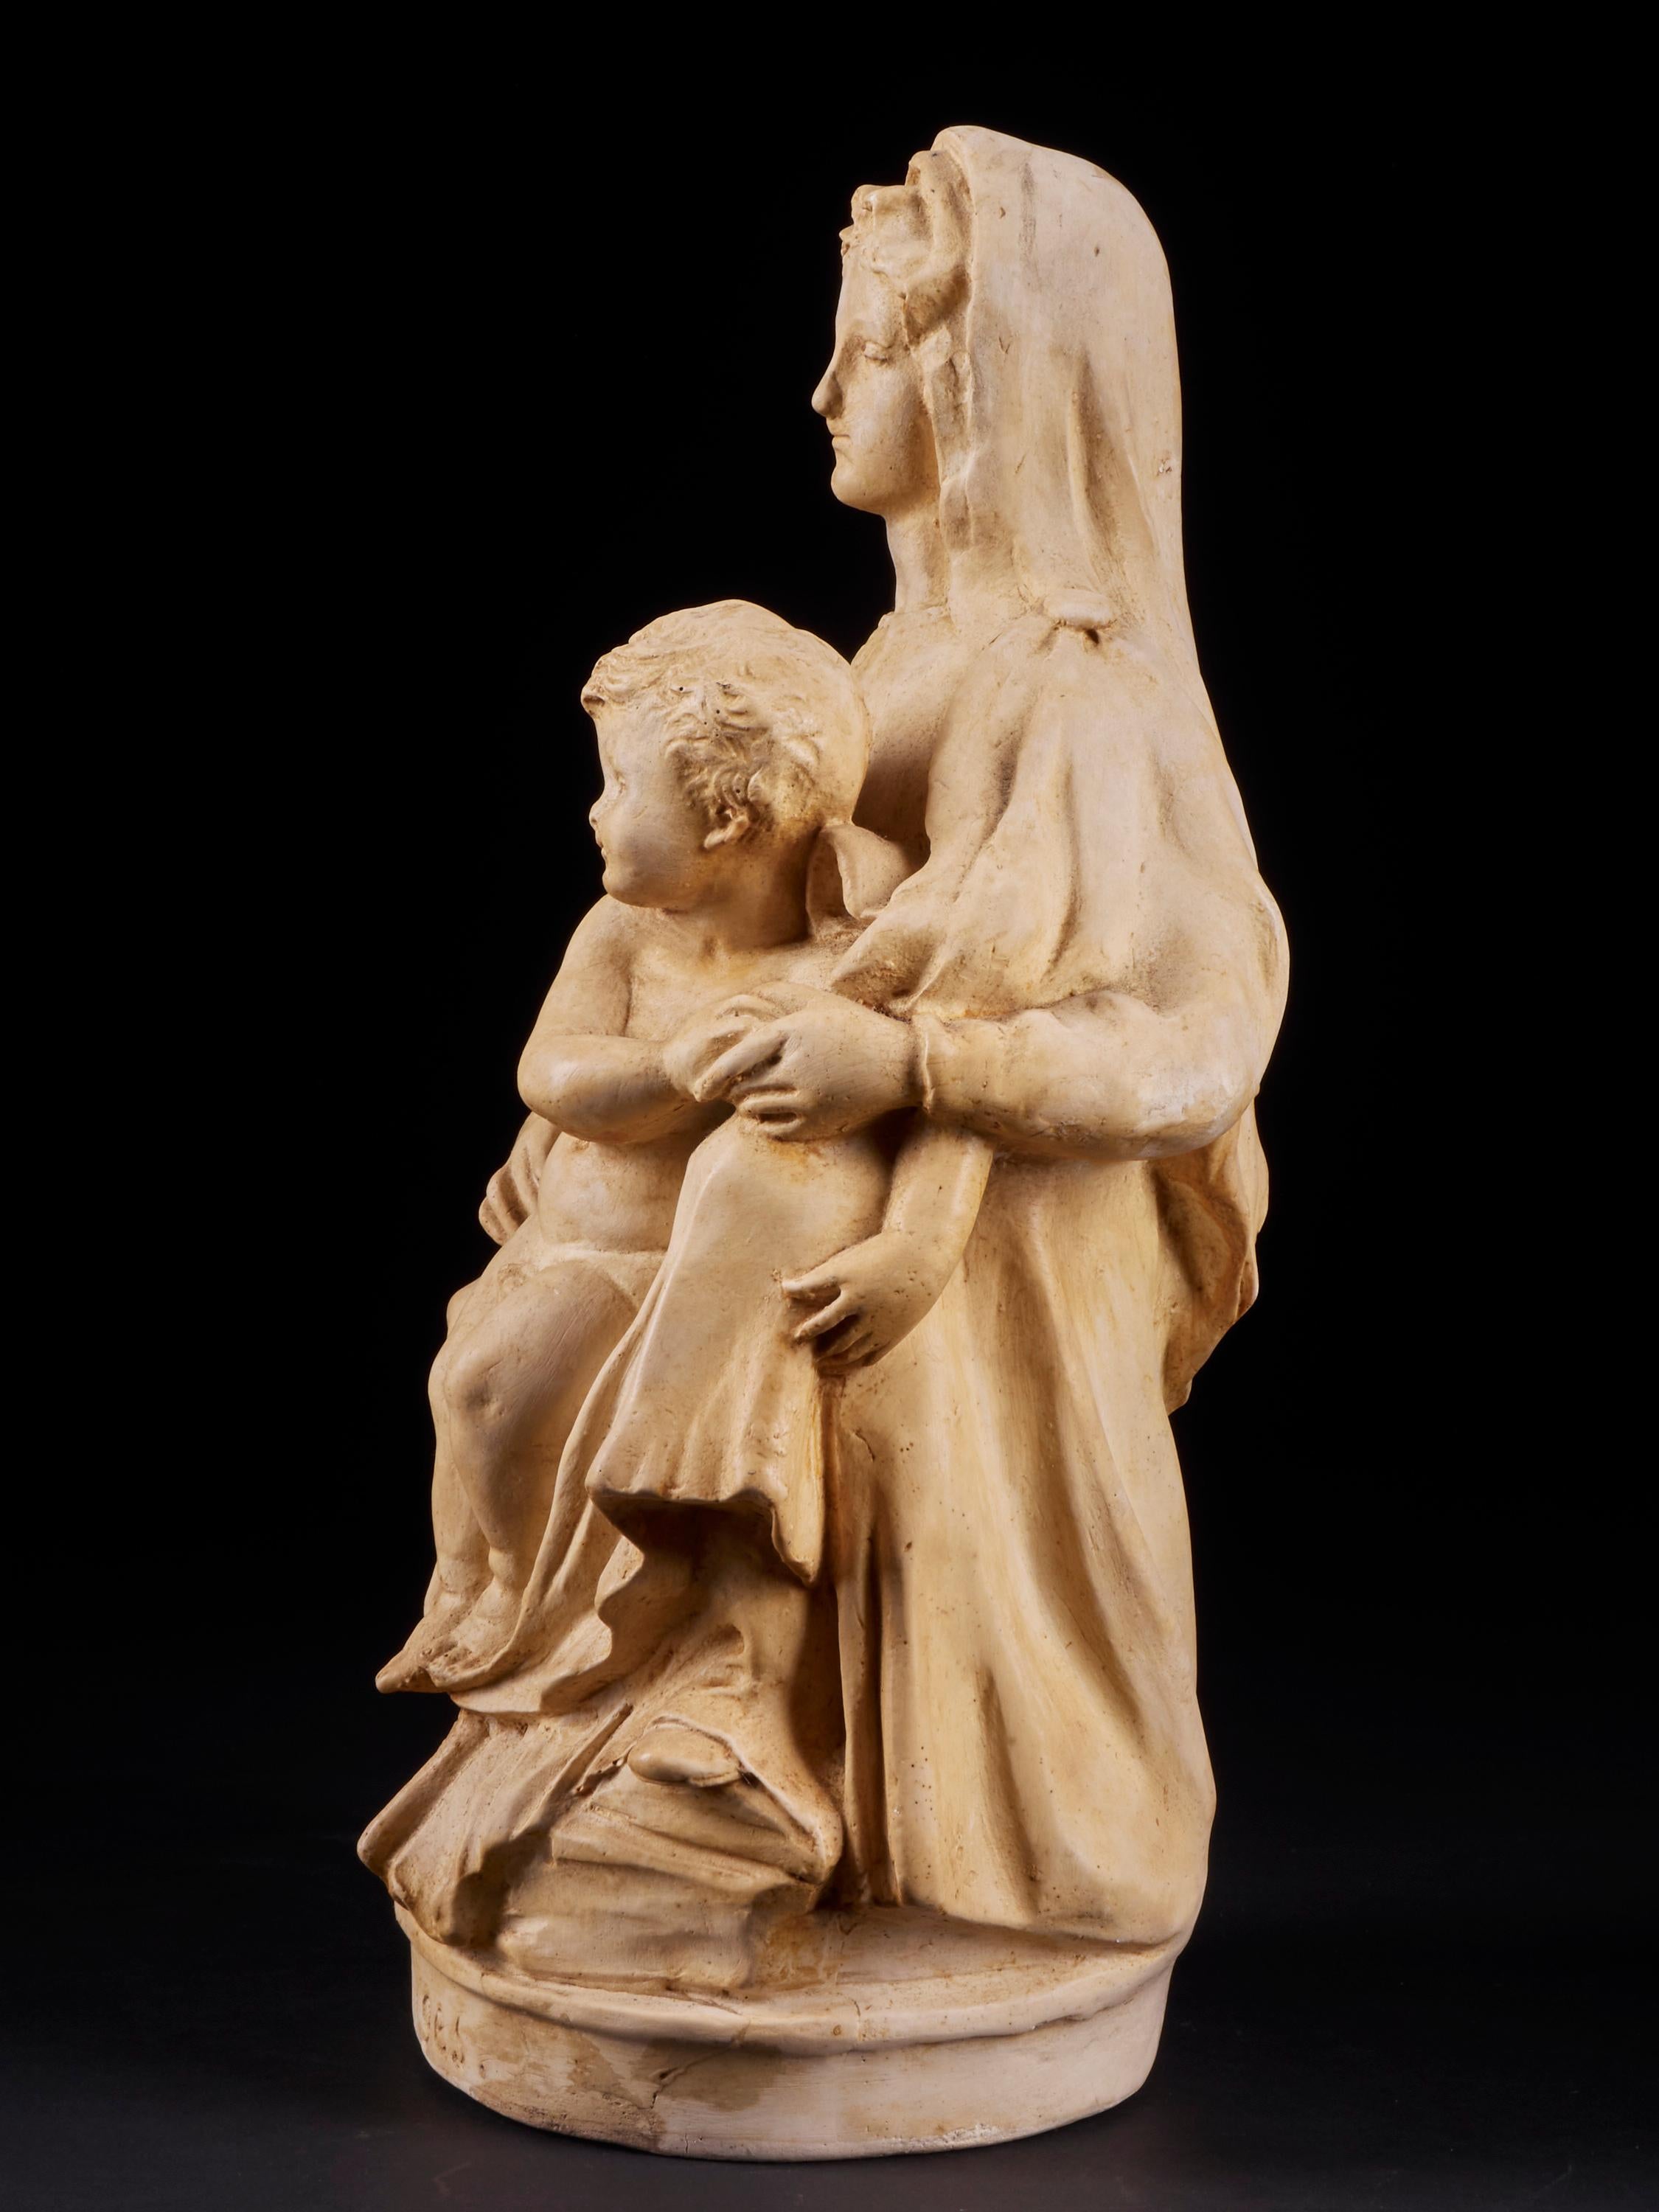 Belgian Mary and Child Plaster Statue Signed and Marked Algget, Devliegher from Bruges